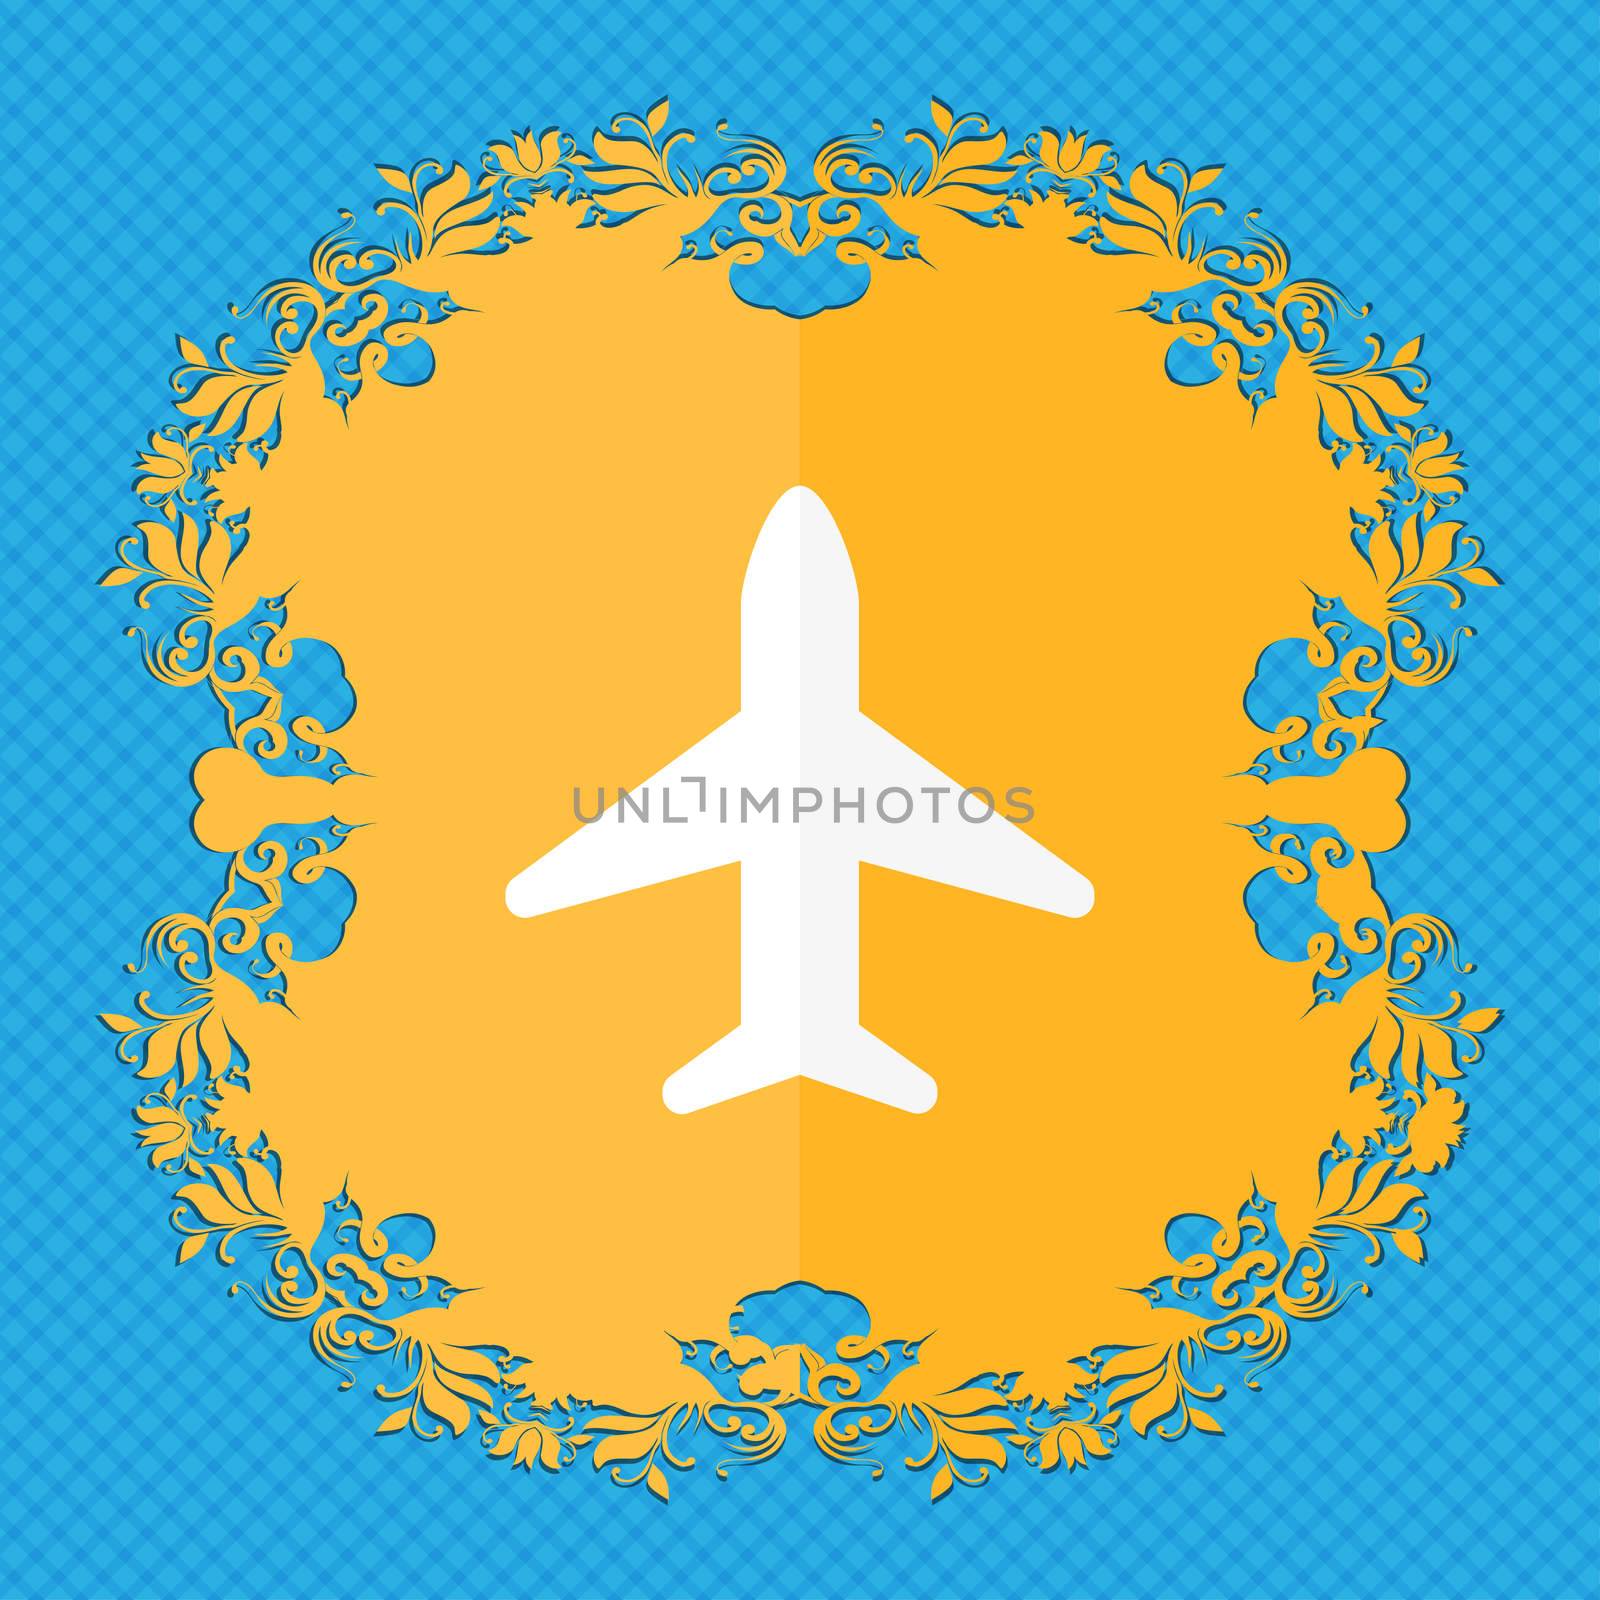 Airplane, Plane, Travel, Flight . Floral flat design on a blue abstract background with place for your text. illustration